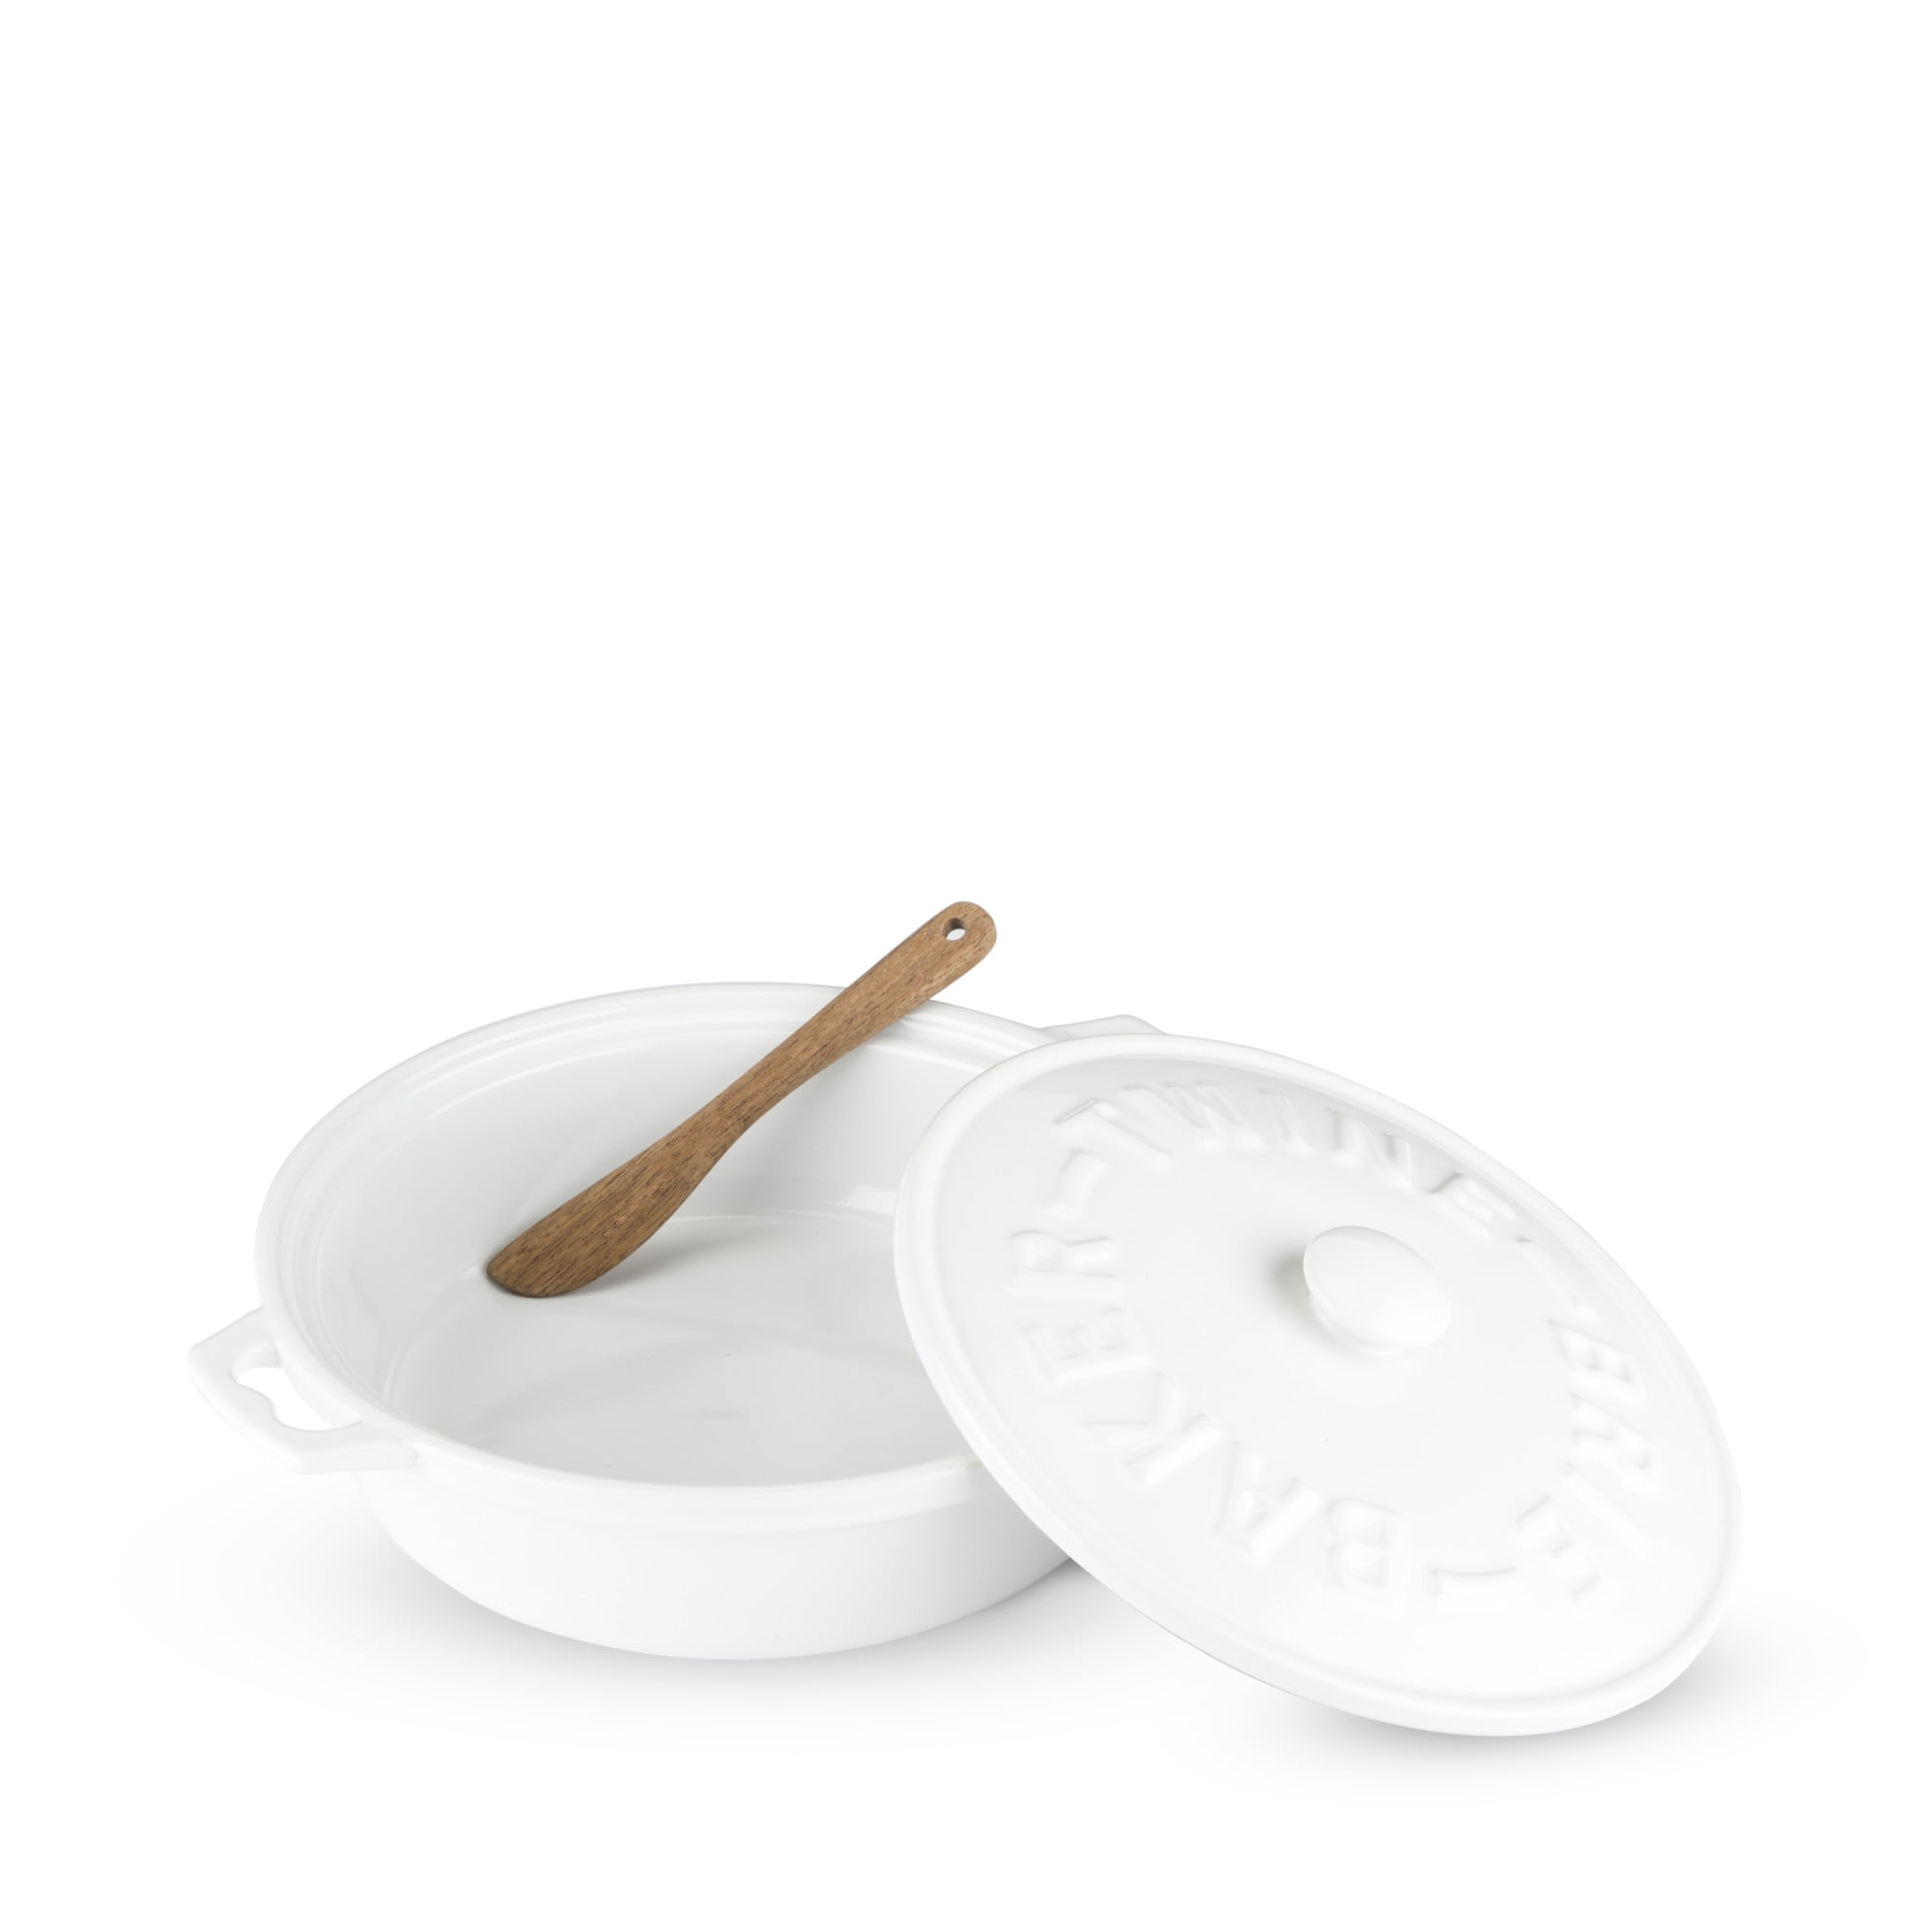  Muldale Brie Baker with Lid and Spreader - Camembert Baker in  Red - Baked Brie Baking Dish - Brie Cheese Baker - 5.5” - With Spreader and  Box : Grocery & Gourmet Food